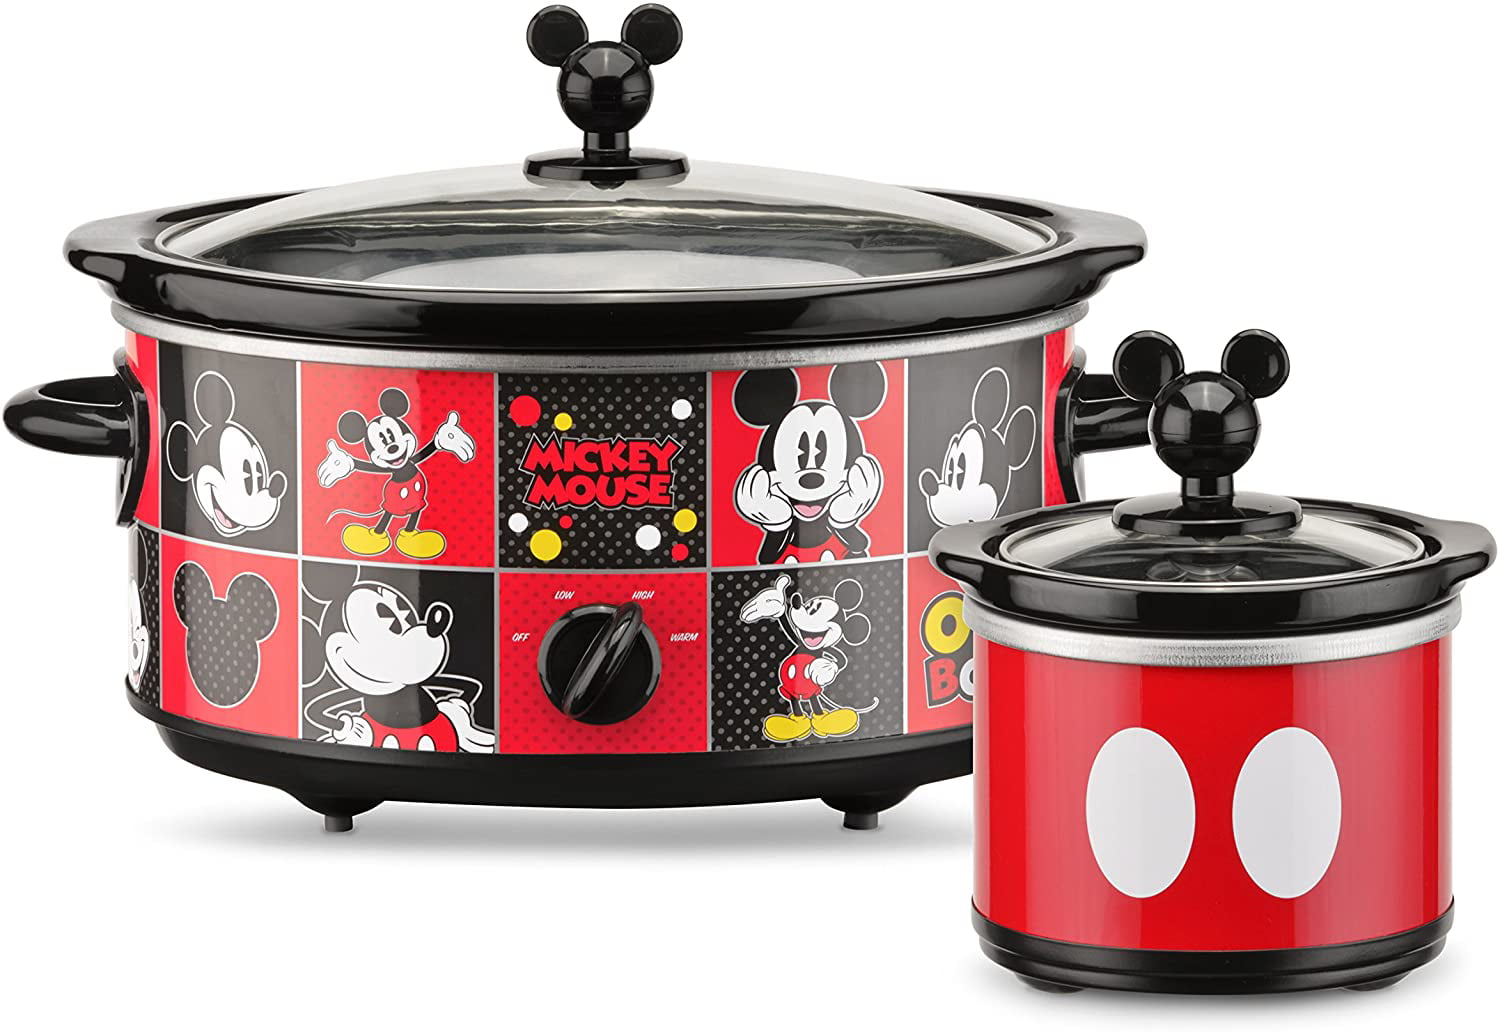 Disney DCM-502 Mickey Mouse Oval Slow Cooker with 20-Ounce Dipper 